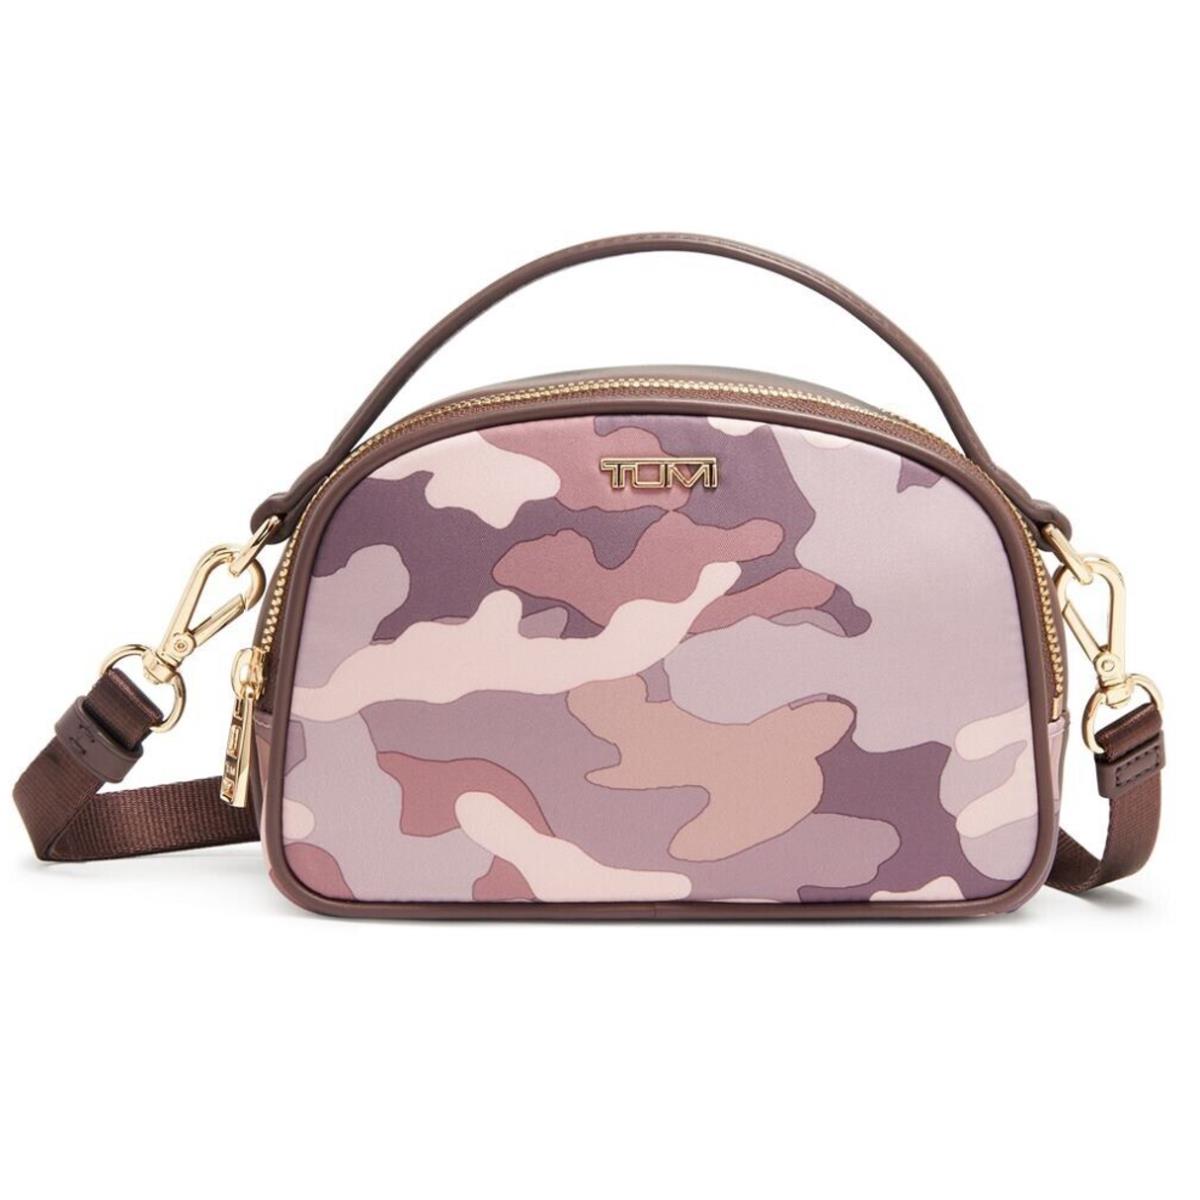 Tumi Voyageur June Crossbody Tumi Tracer Camouflage Pink - Handle/Strap: Brown, Hardware: Silver, Lining: Gray